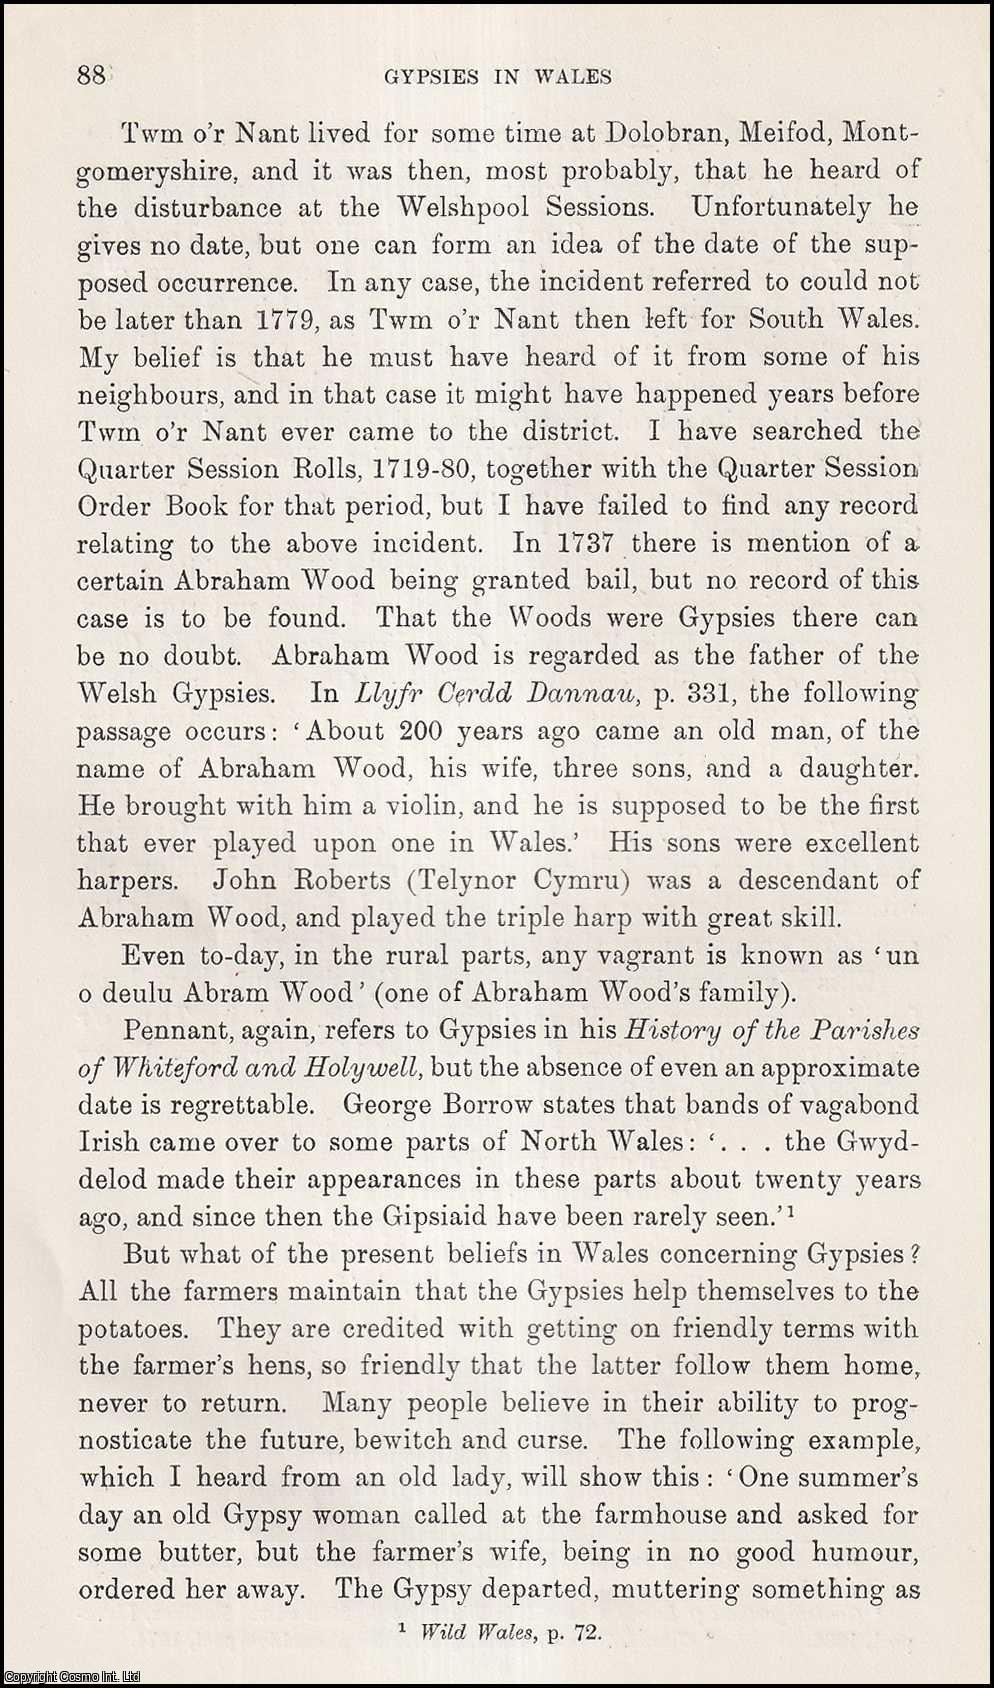 R.W. Jones - Gypsies in Wales. An uncommon original article from the Journal of the Gypsy Lore Society, 1930.